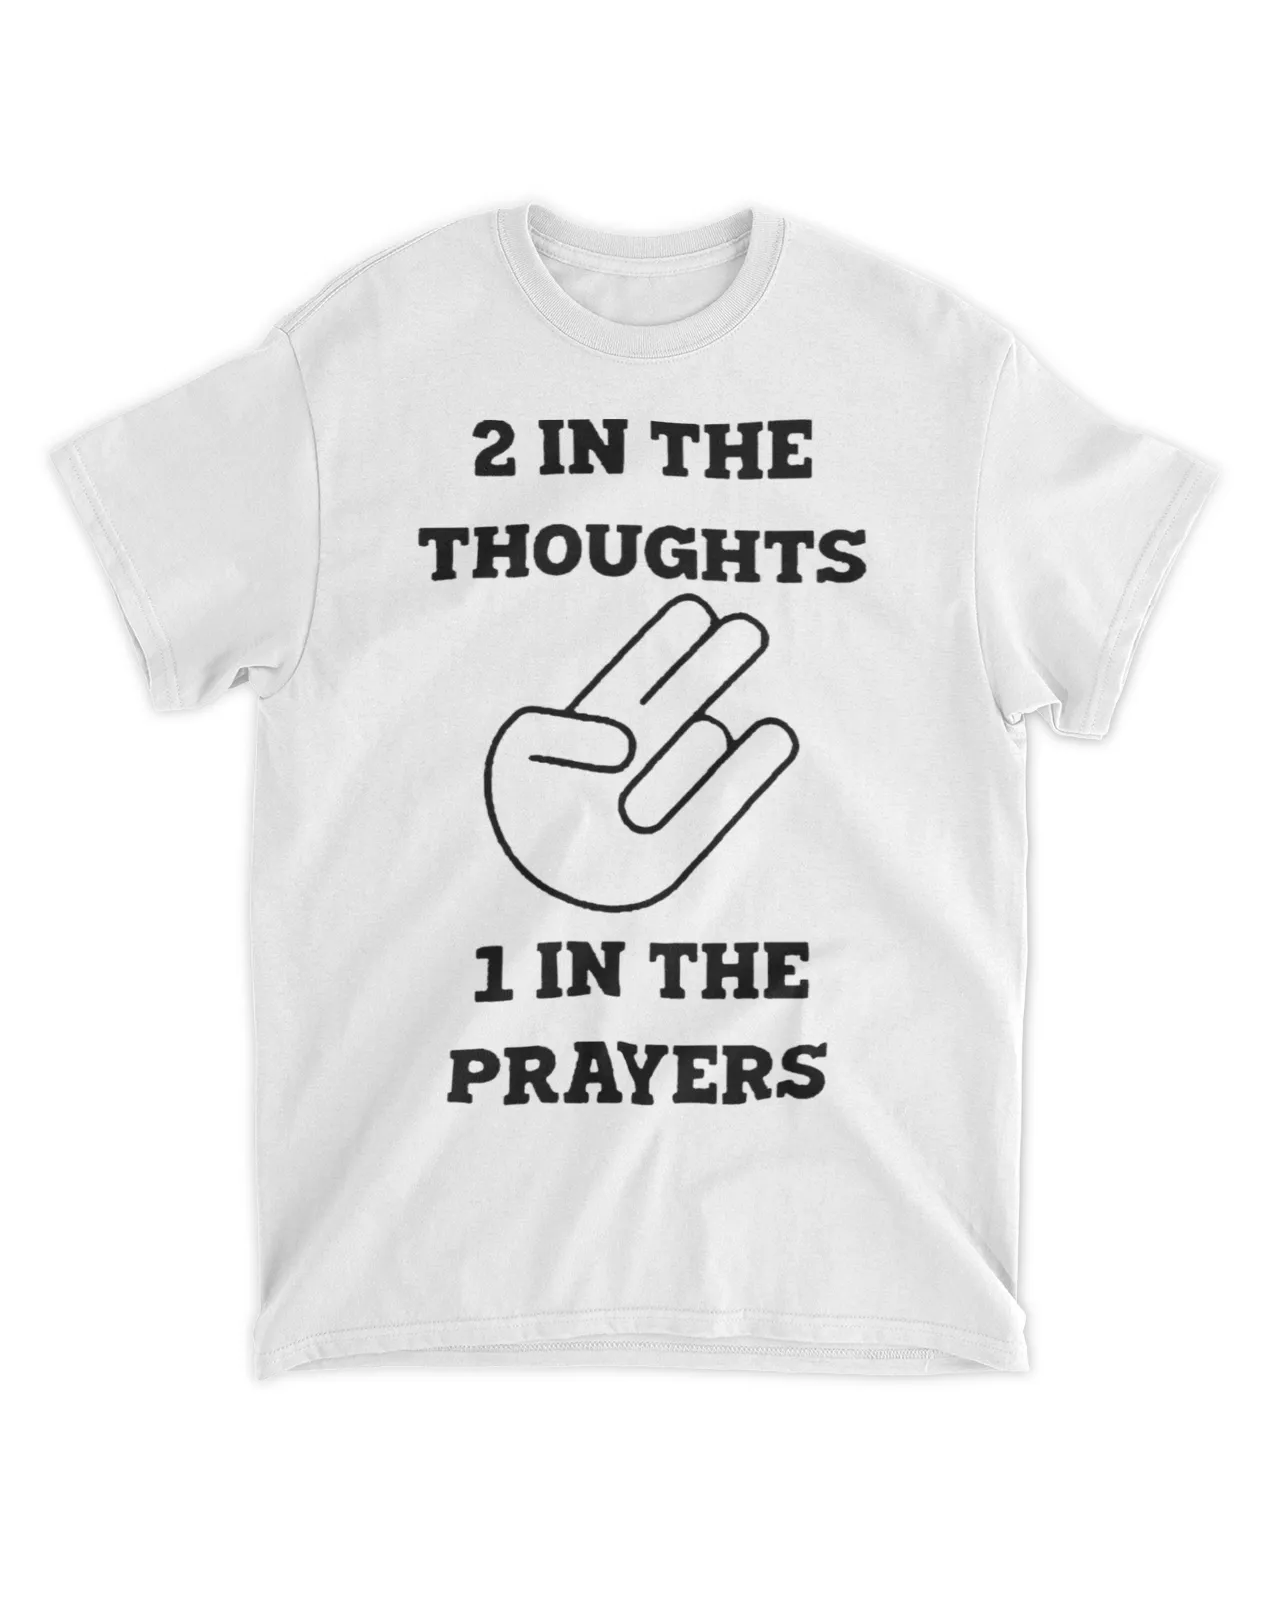  2 in the thoughts 1 in the prayers shirt